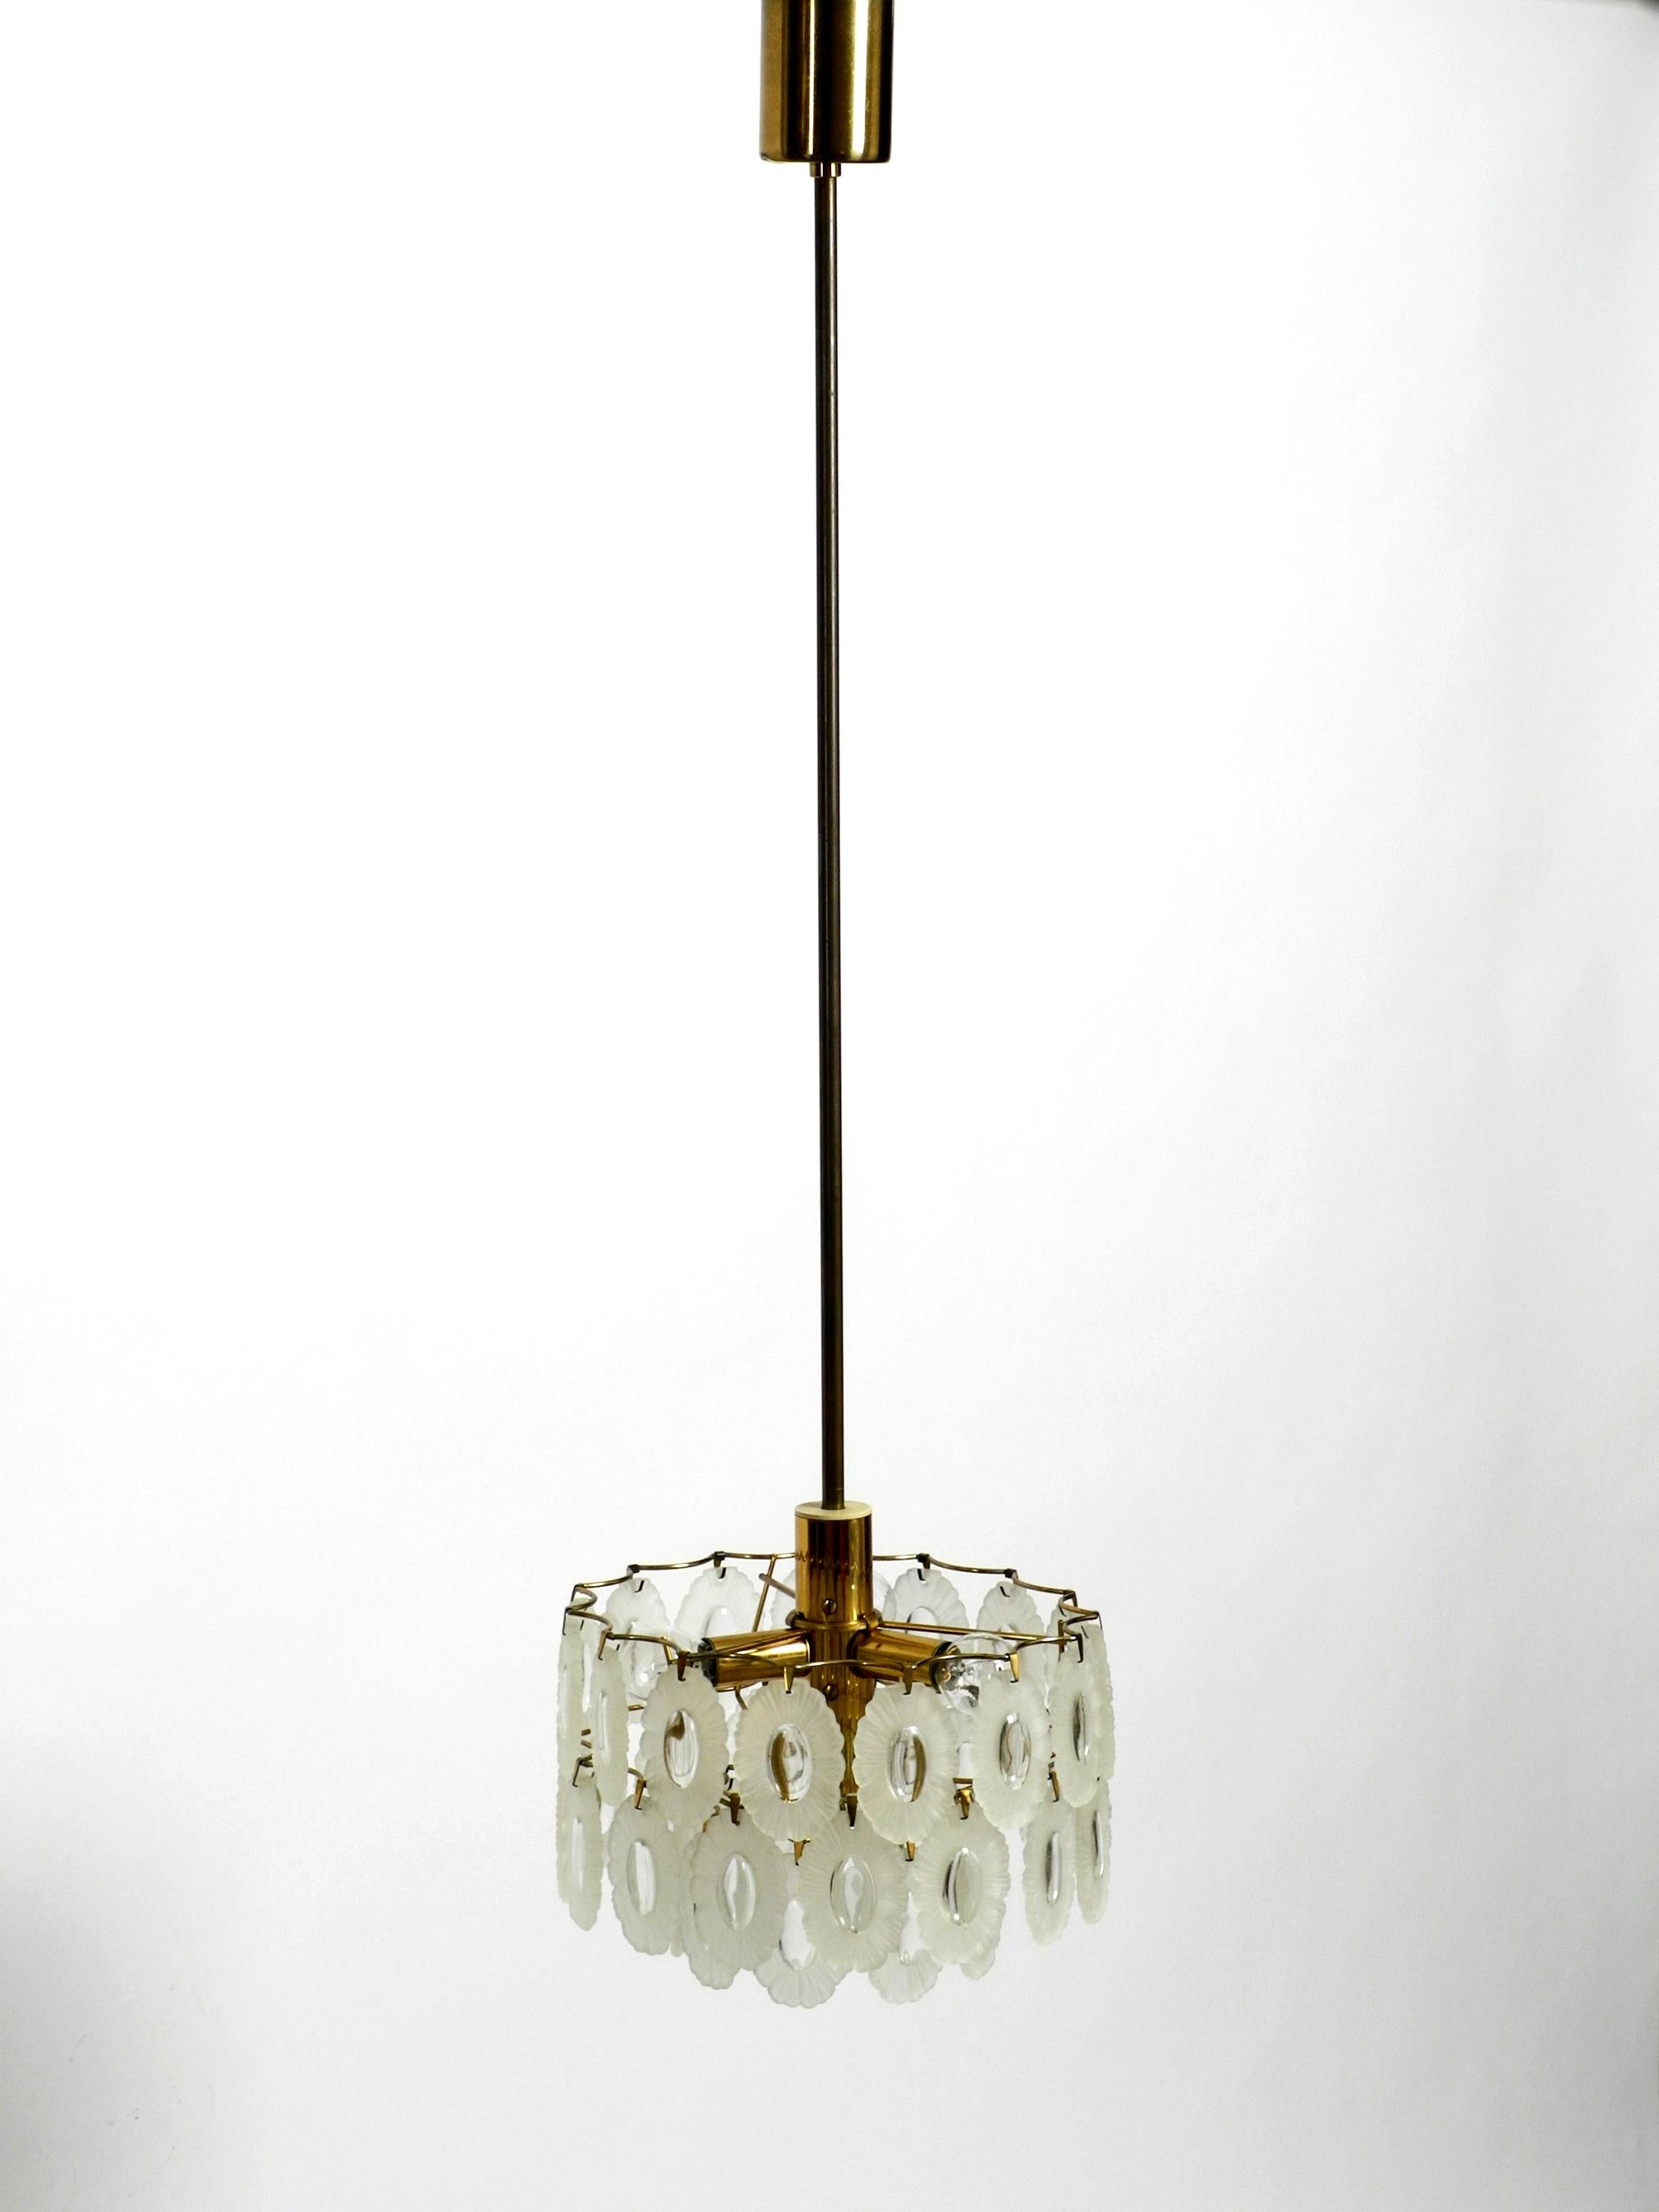 Beautiful Italian midcentury chandelier with oval Murano glass plates. Satin-finished oval lenses that are transparent to the middle. Very elaborately made.
Complete frame with rod and canopy made of polished brass. High quality ceiling lamp for a